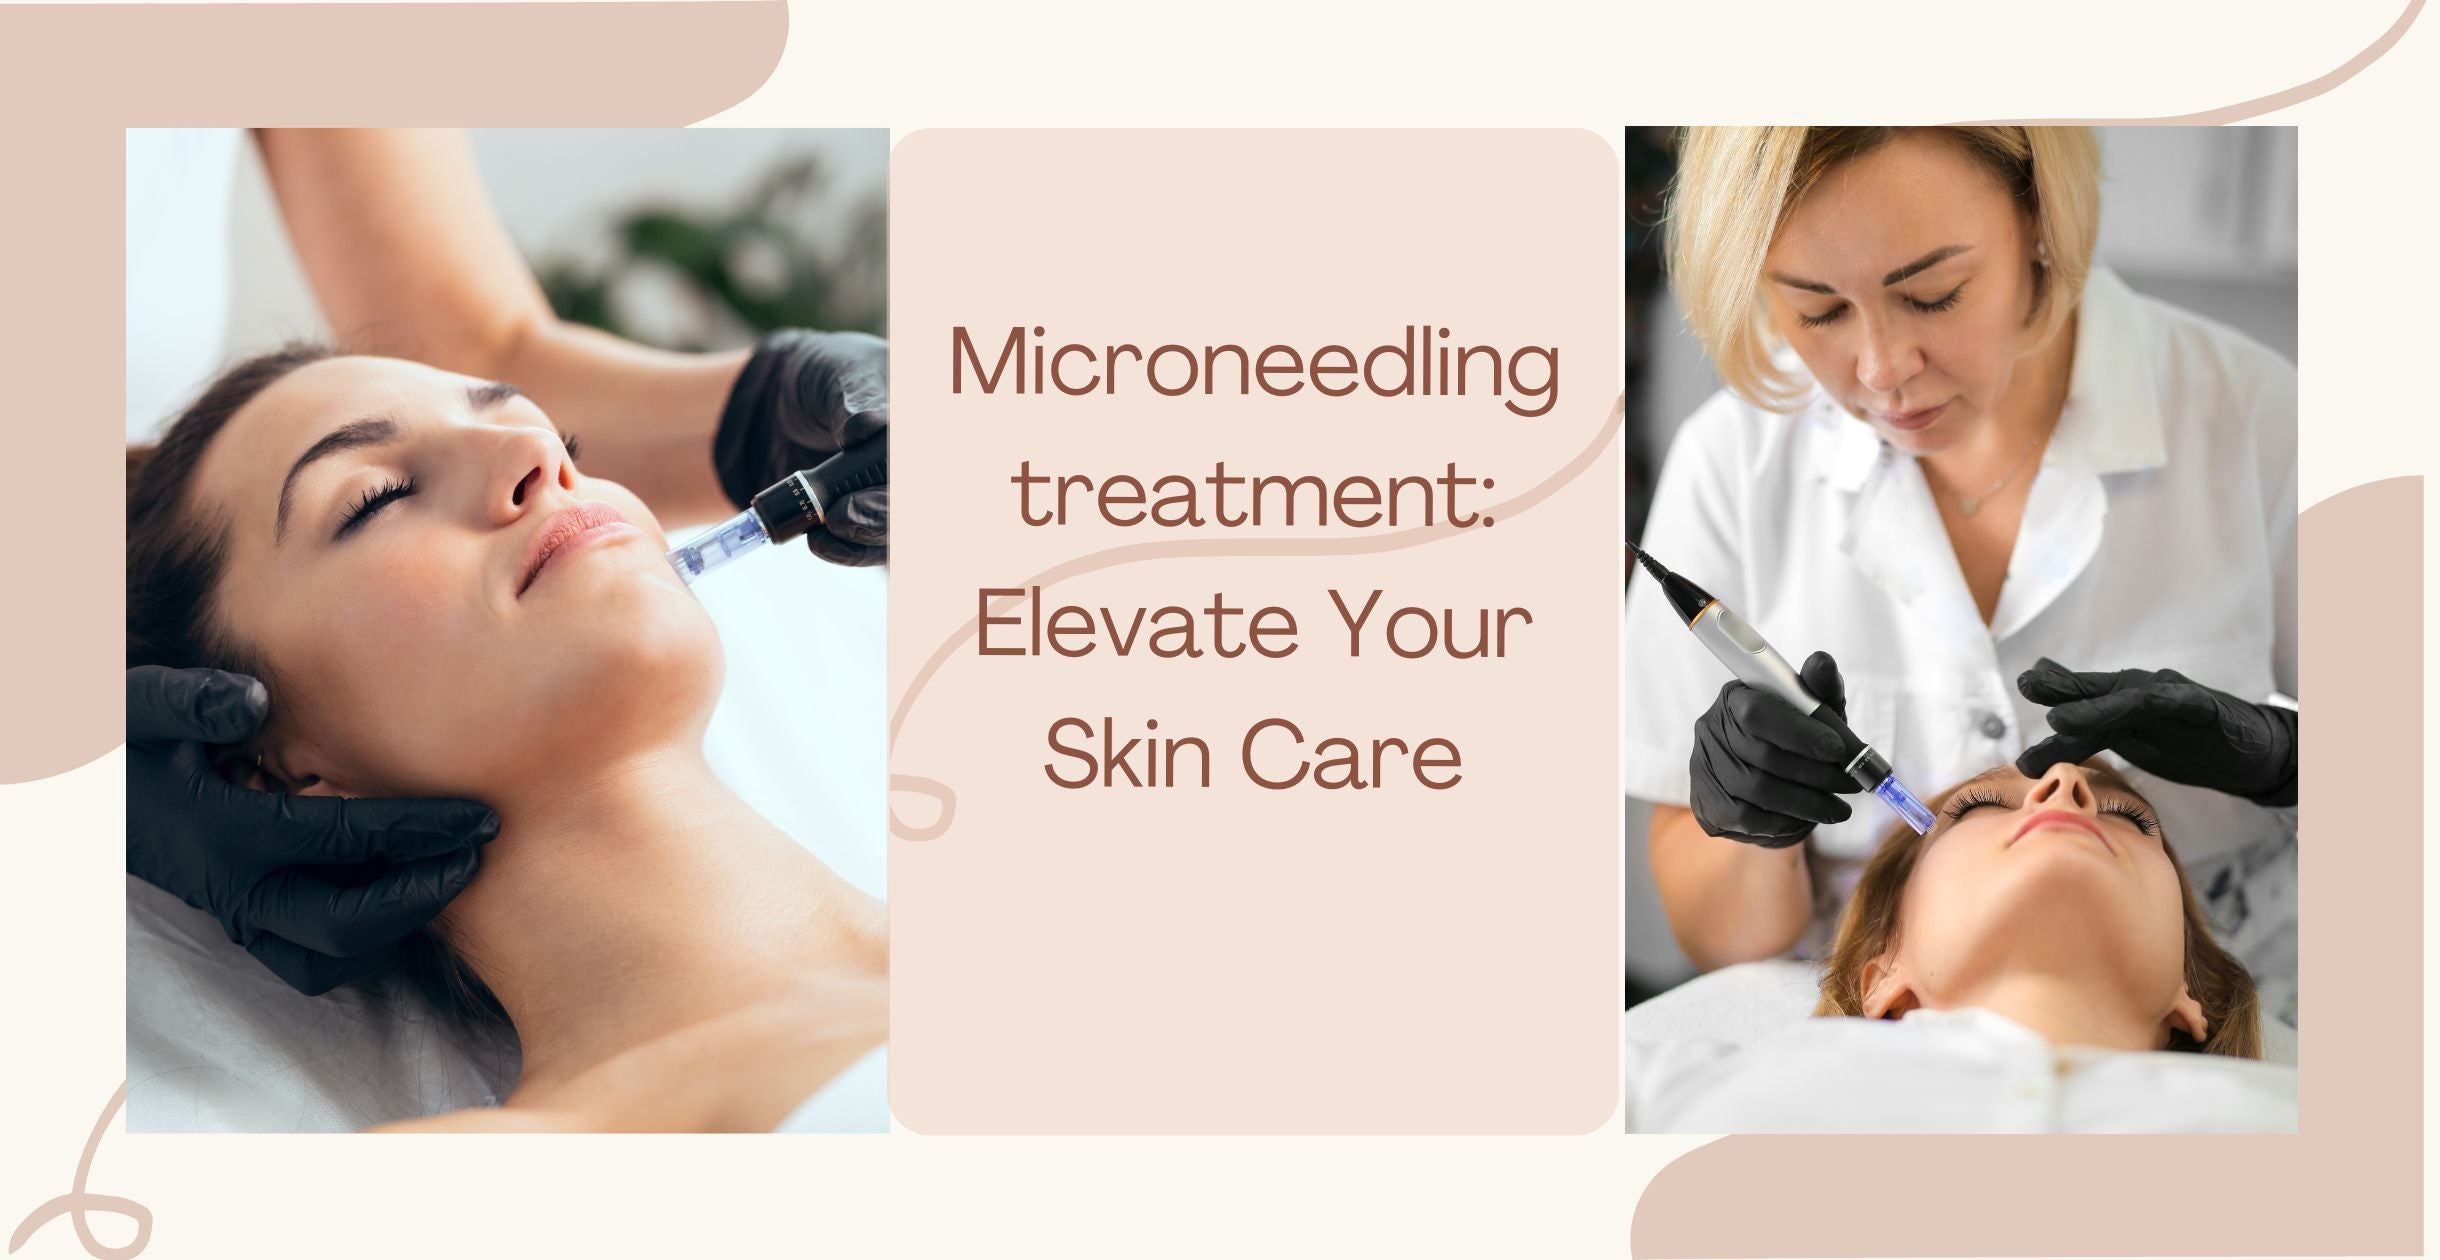 Microneedling treatment: Elevate Your Skin Care